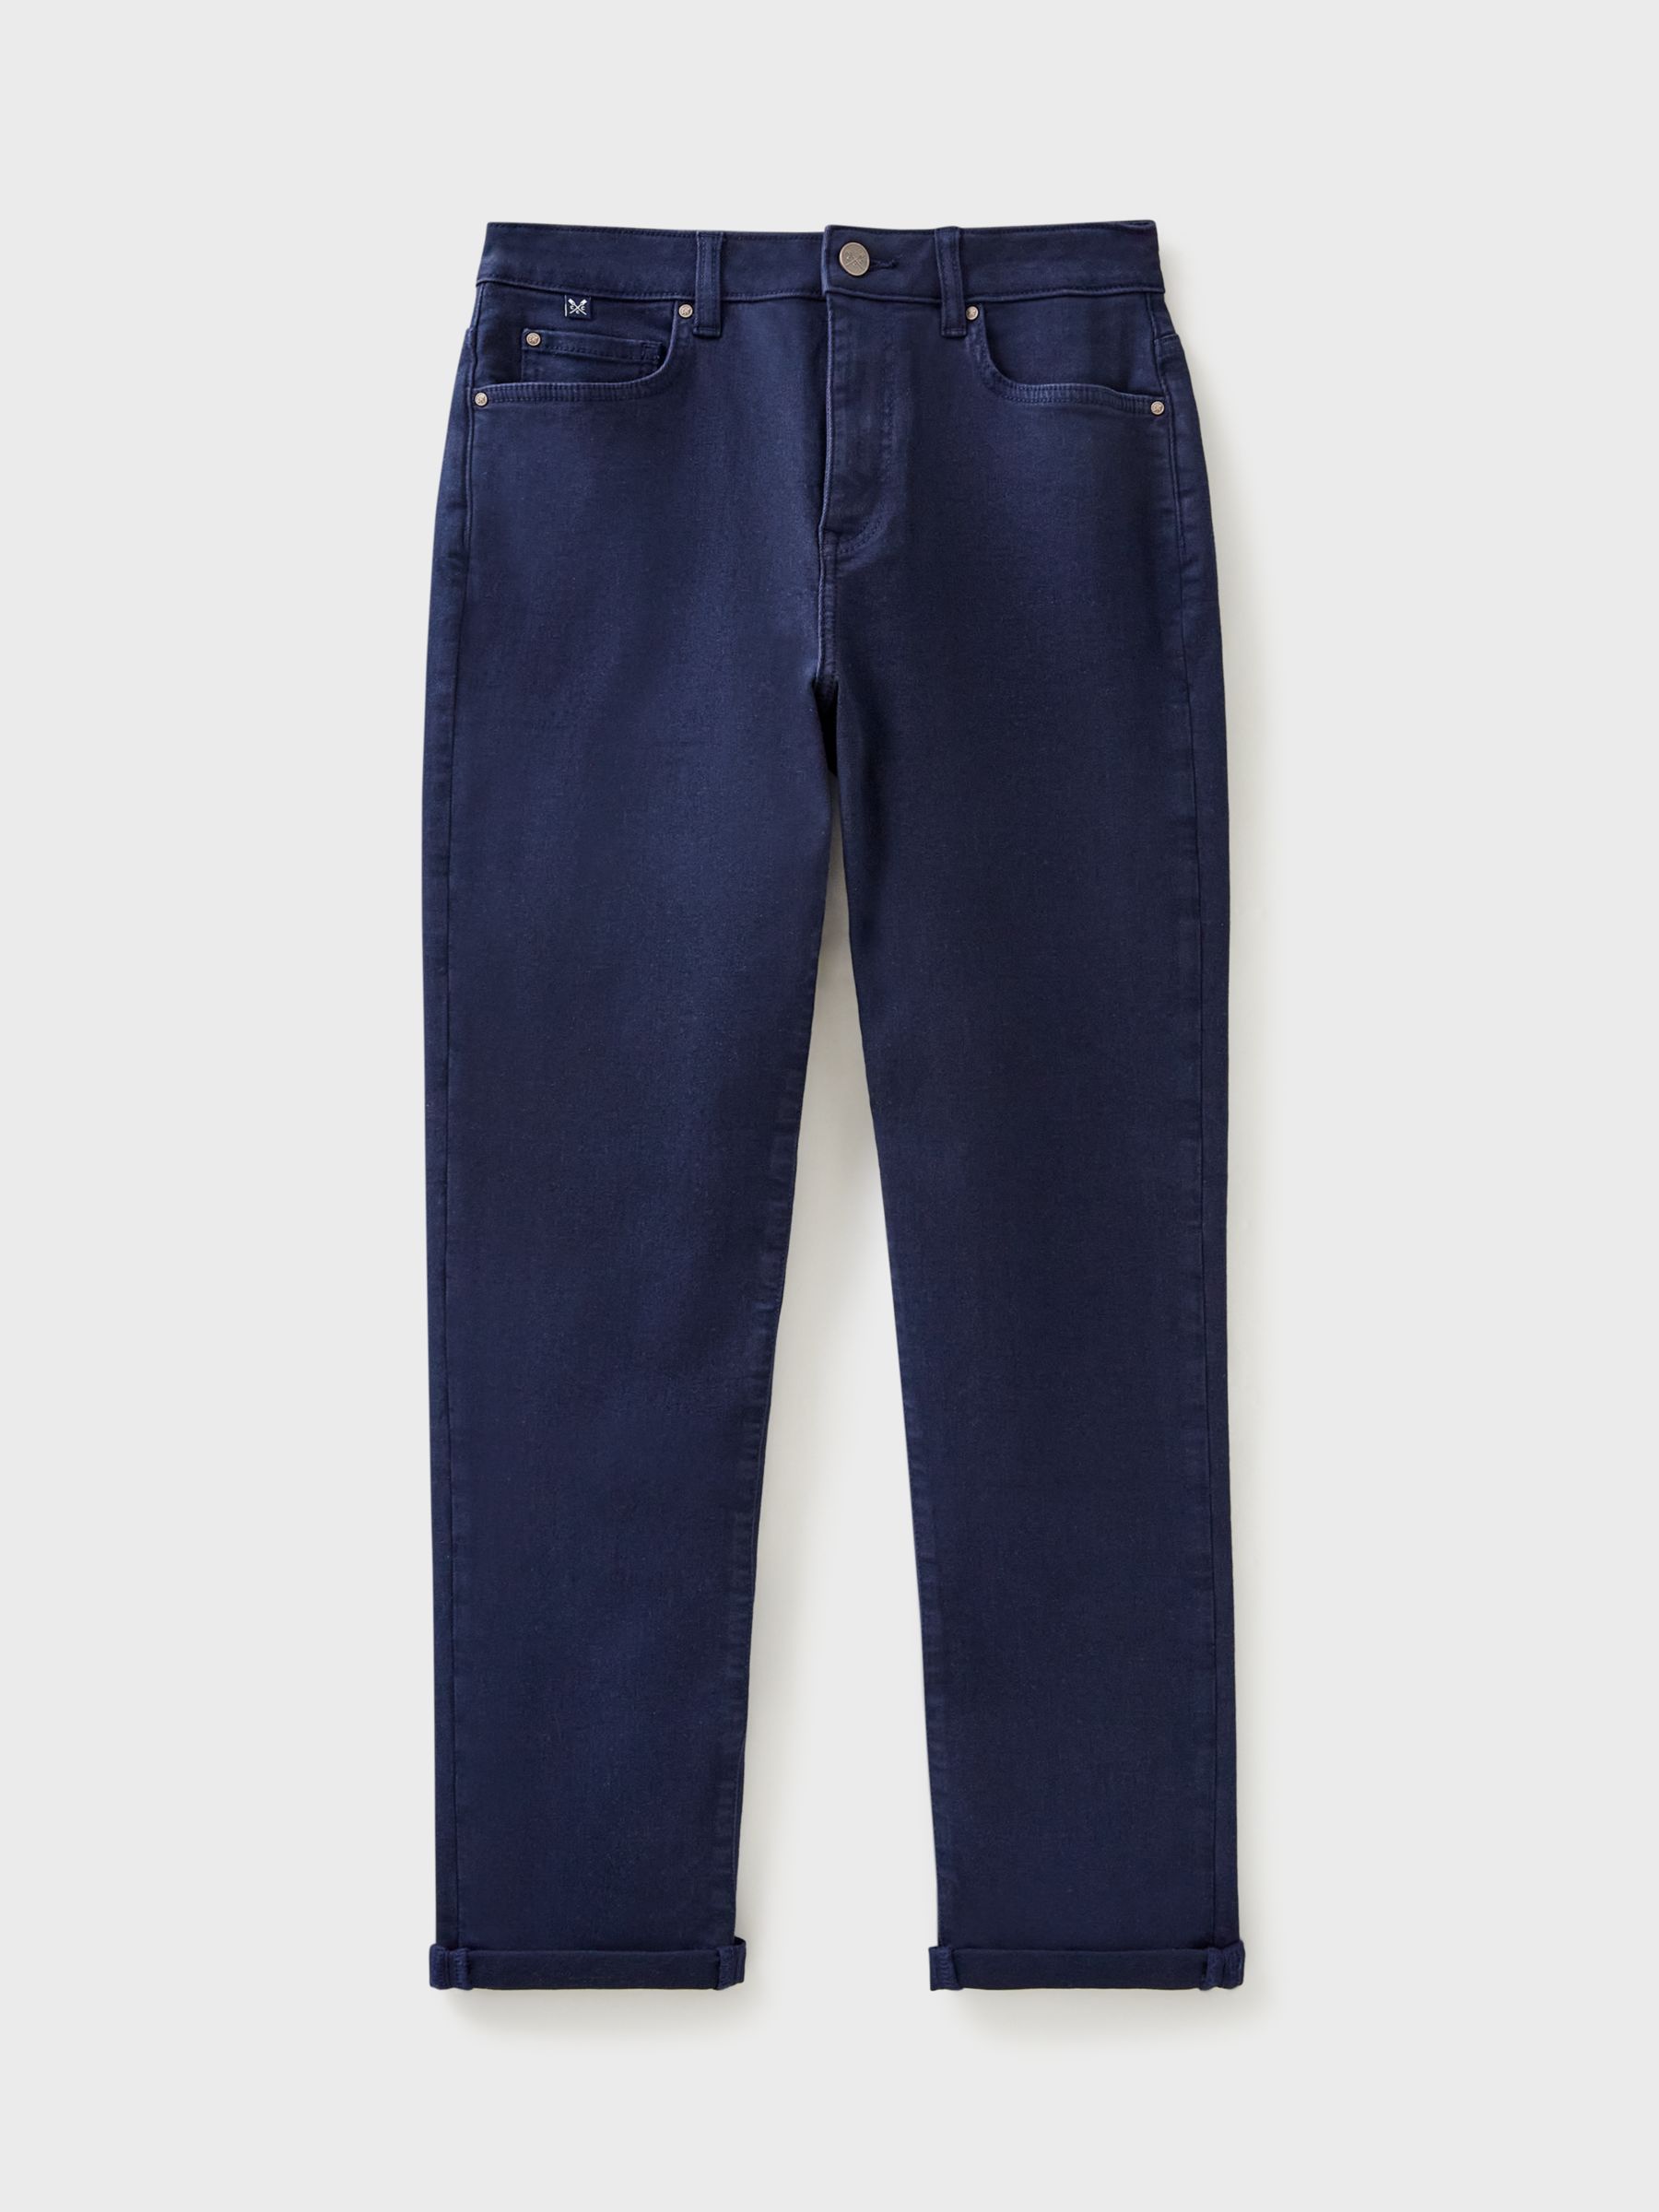 Crew Clothing Brompton Twill Trousers at John Lewis & Partners